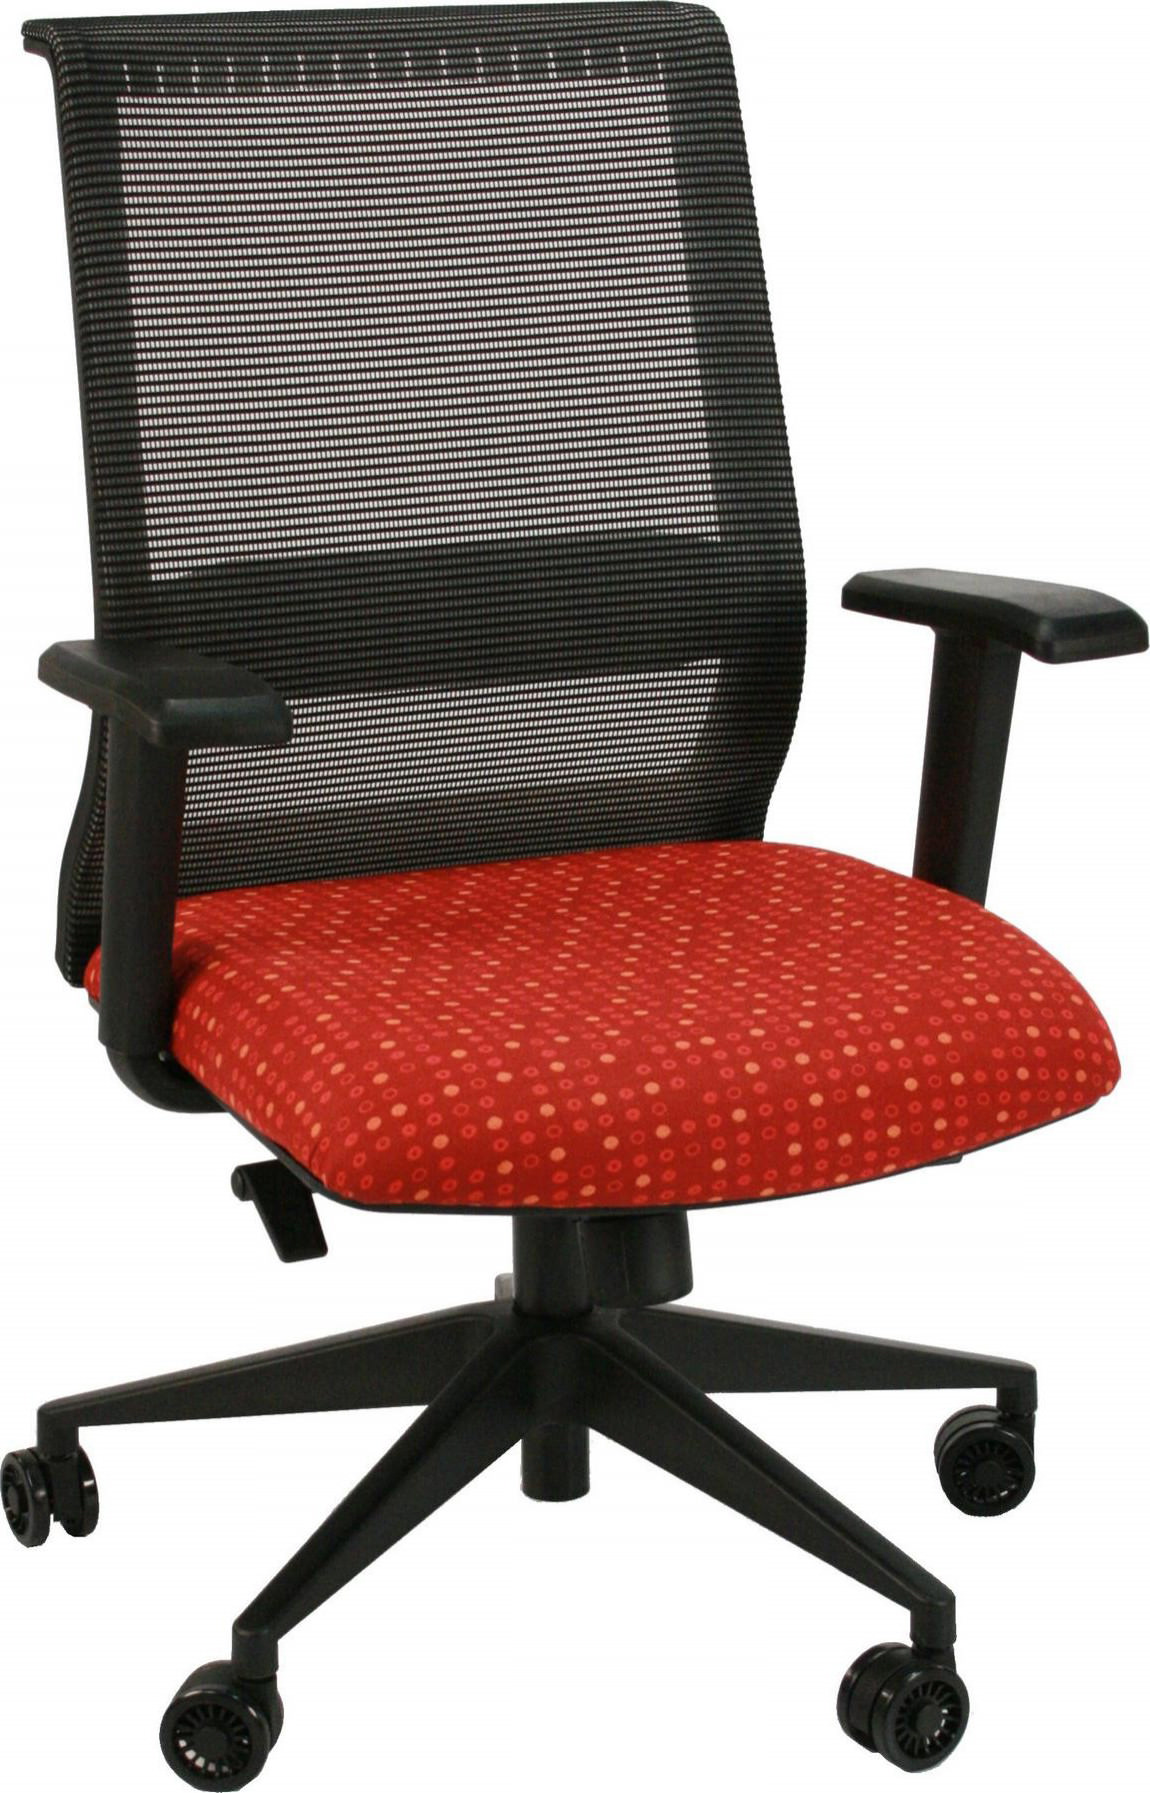 Heavy Duty Swivel Chair With Lumbar Support